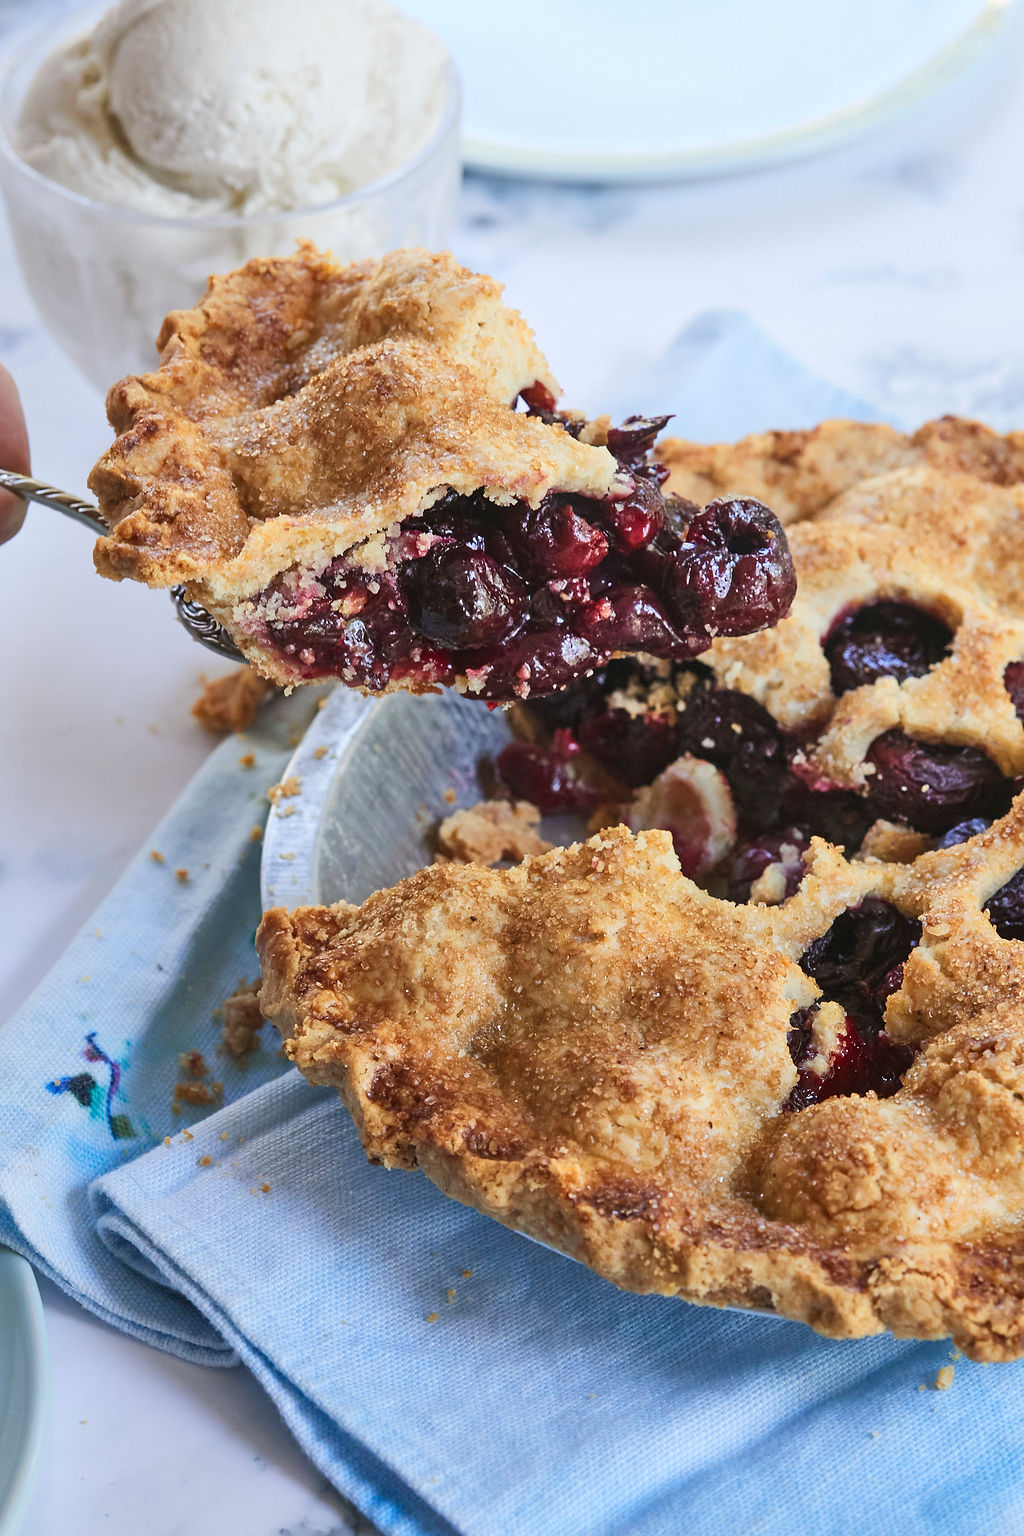 A slice of classic cherry pie recipe to show texture and color.